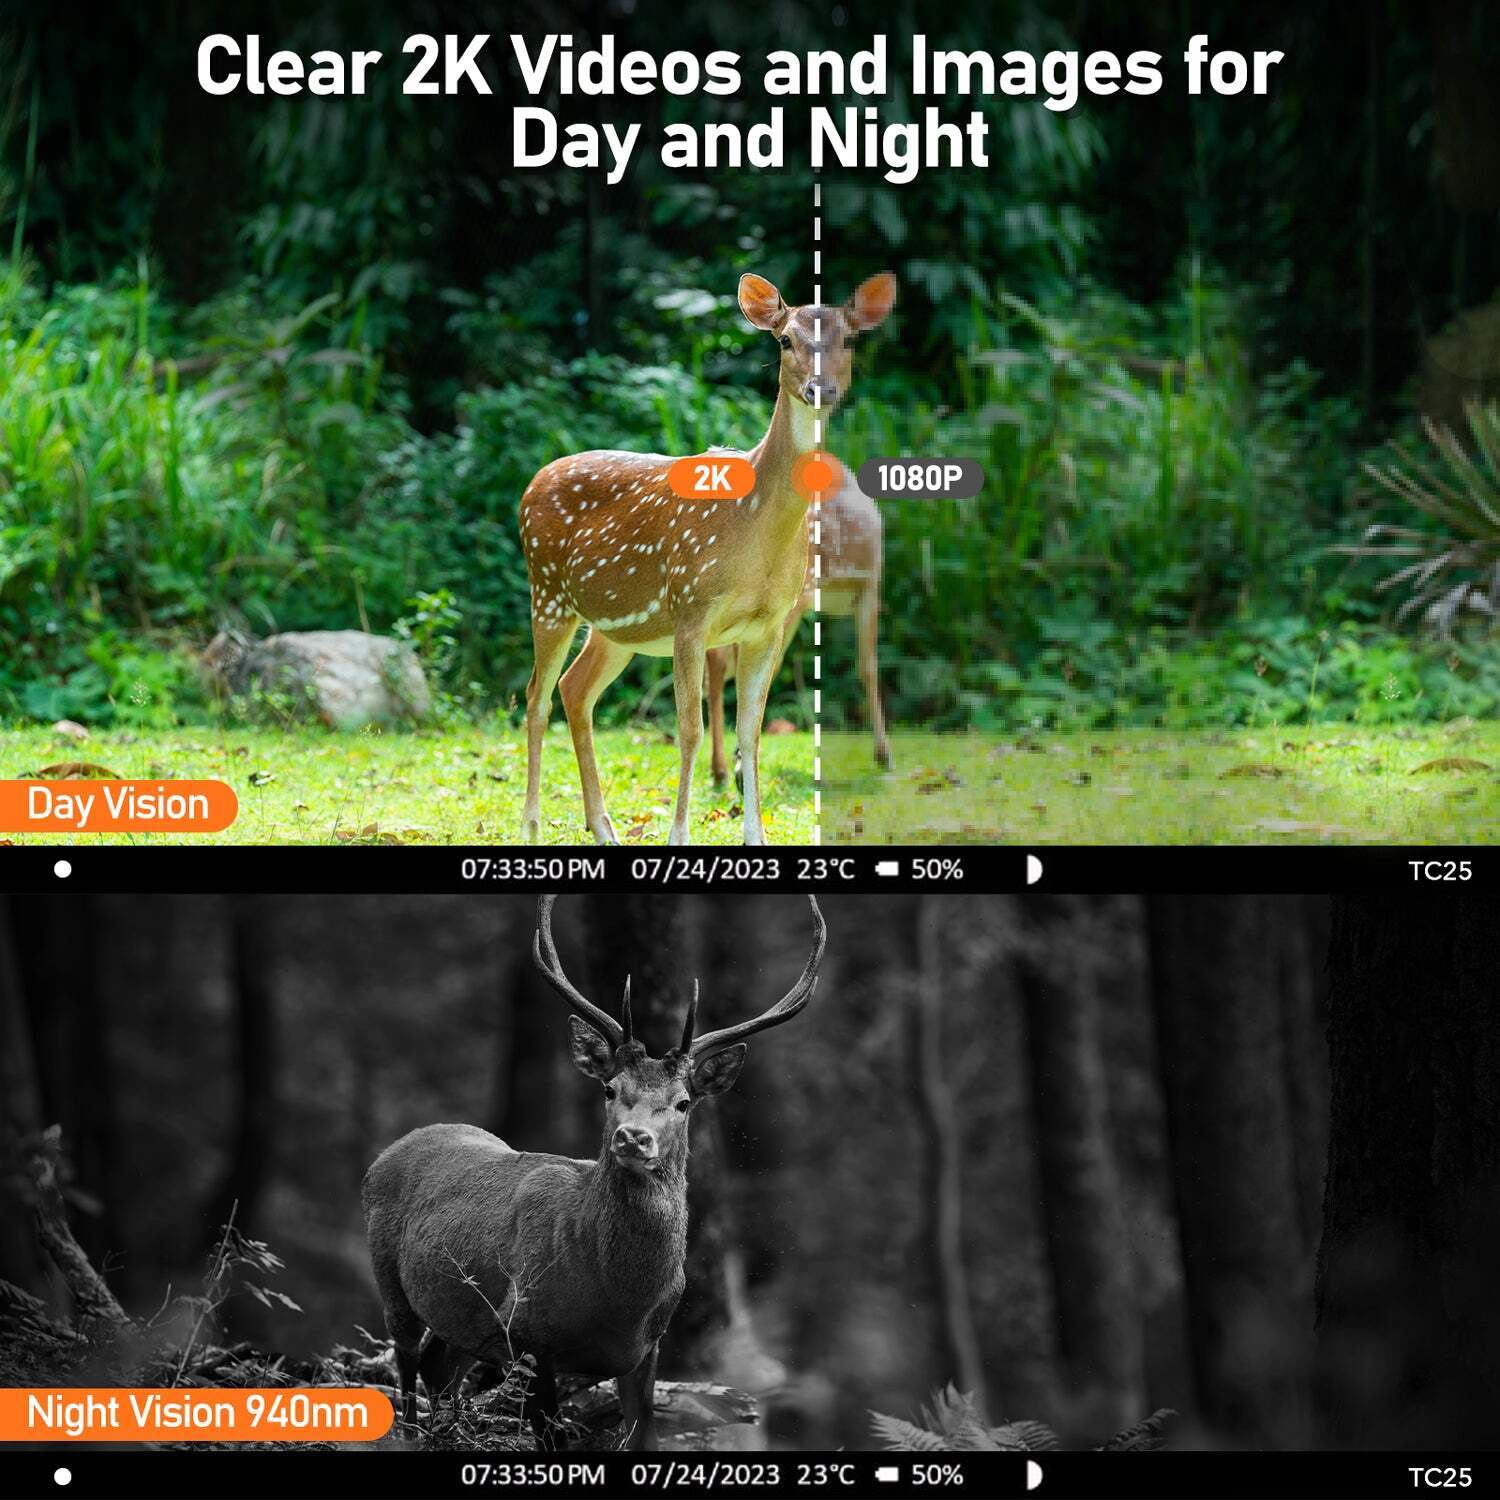 Deer hunting camera, model TC25, capturing clear 2K videos and images of a deer in the forest during both day and night, with time, date, temperature, and battery life details.